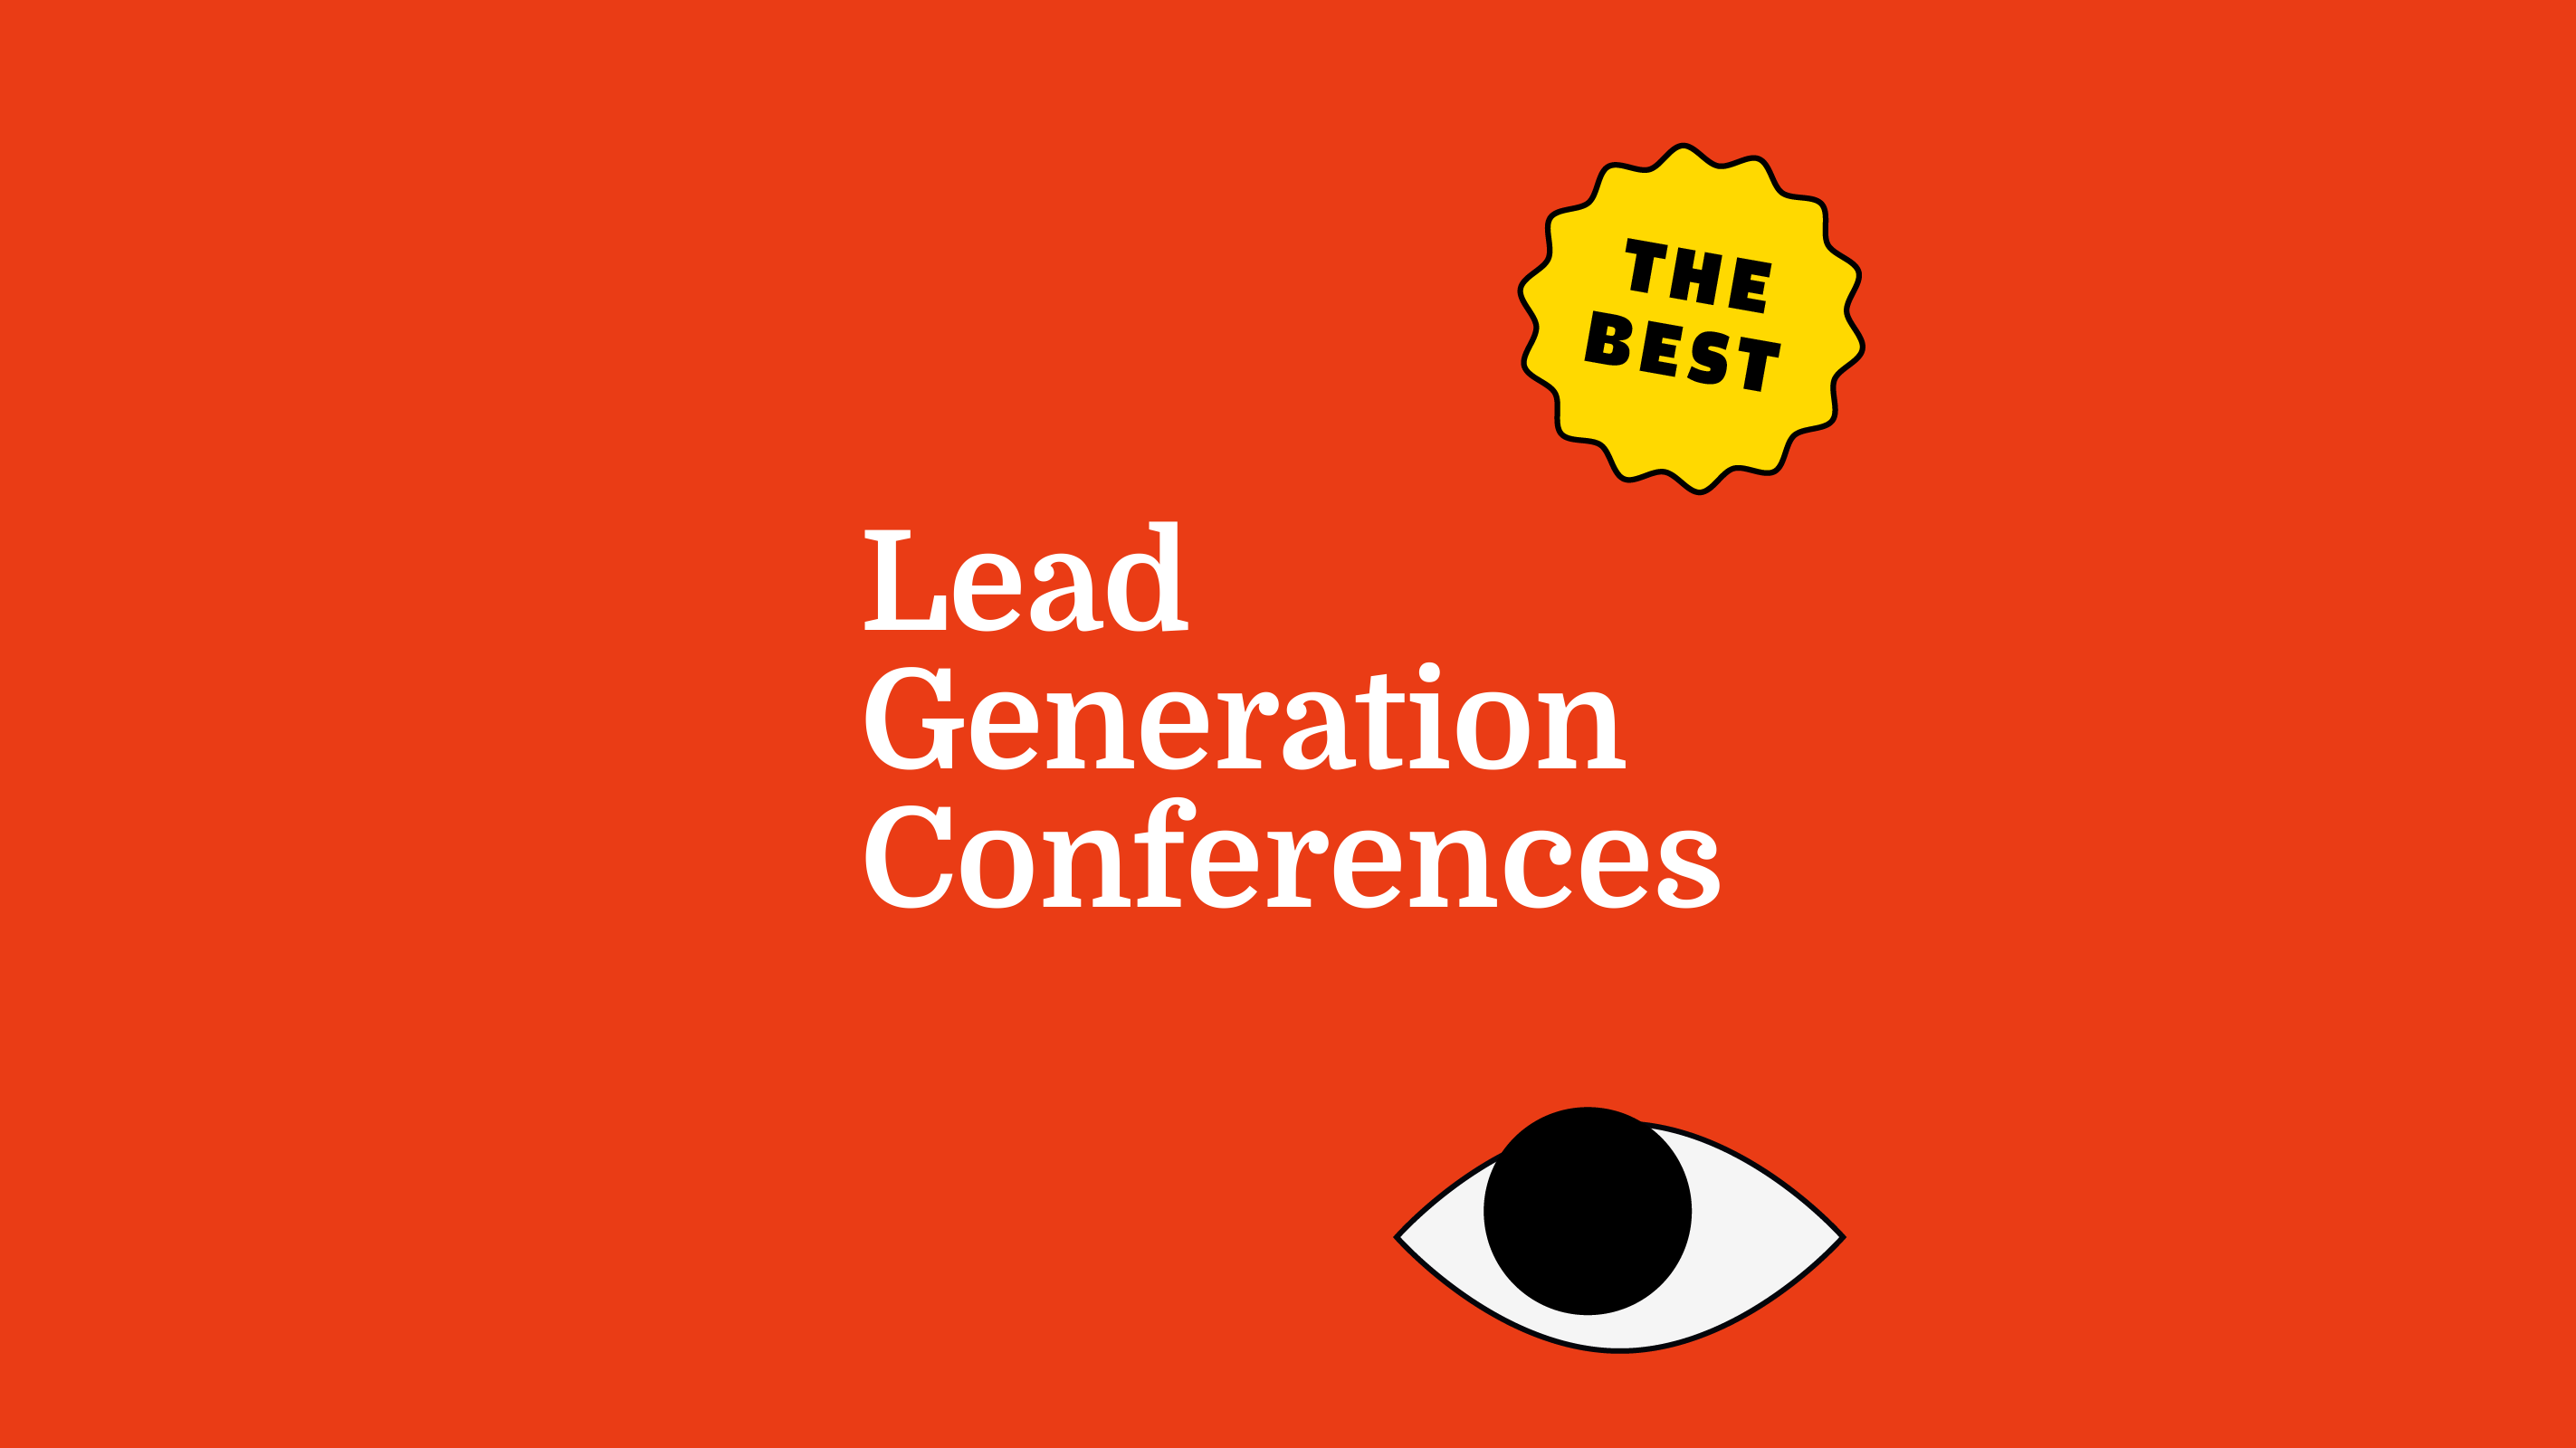 REV-lead-generation-conferences-featured-image-4949